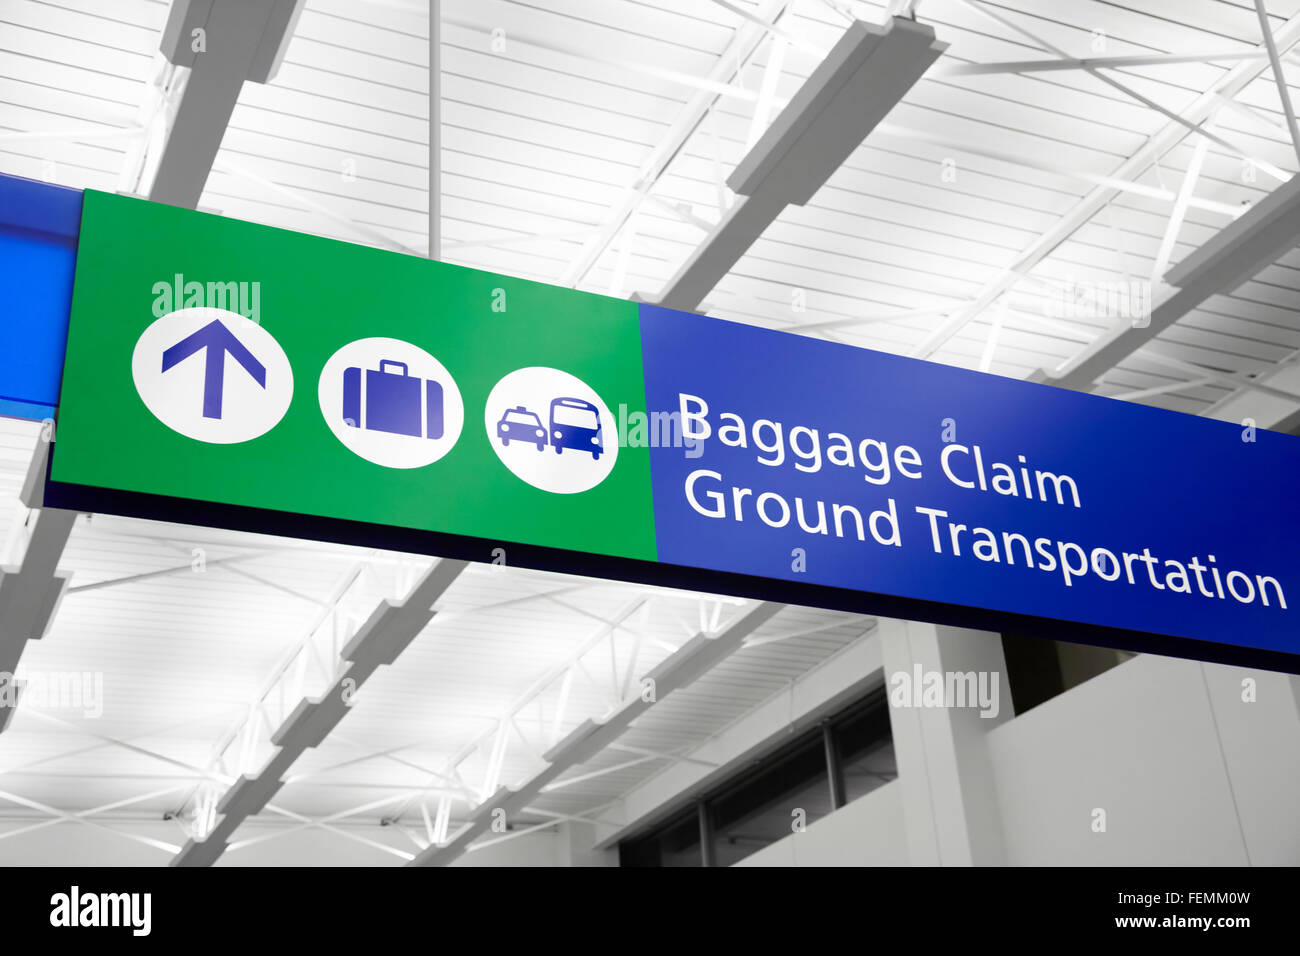 Airport baggage claim and ground transportation sign with suitcase, bus, and taxi symbols. Sign is blue and green. Stock Photo